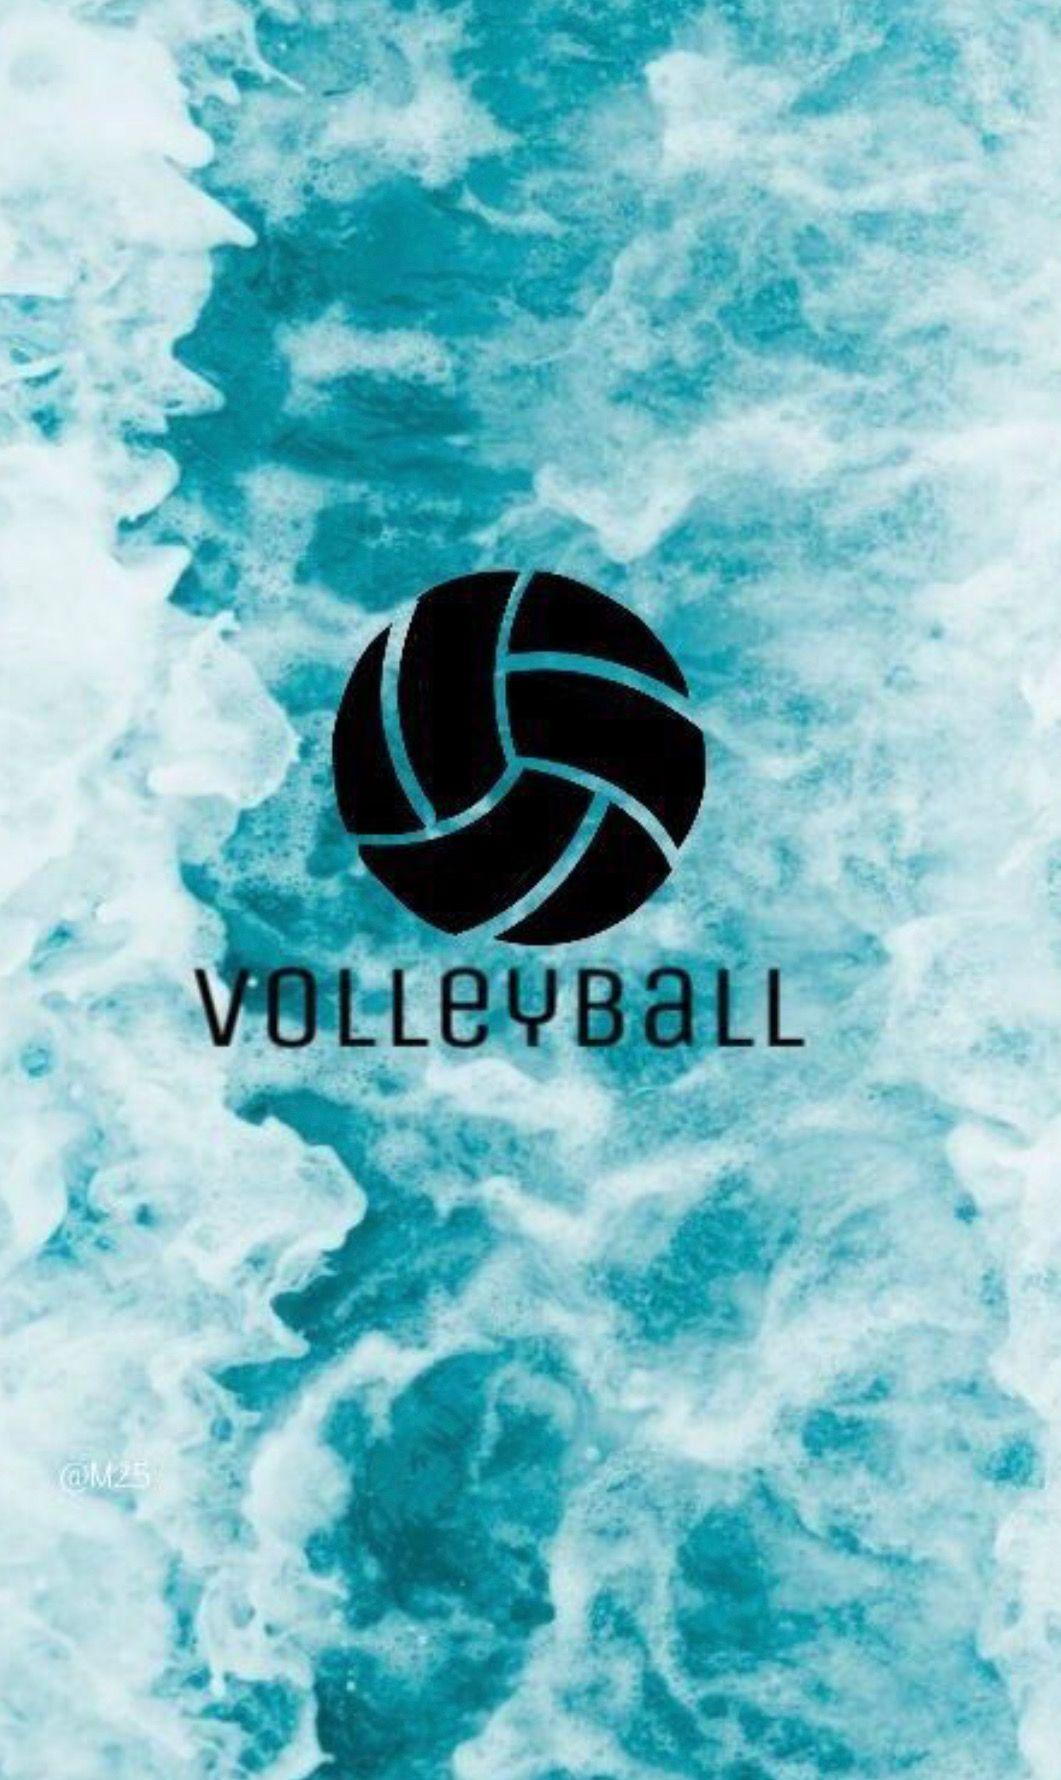 Cool Volleyball Wallpapers - Top Free Cool Volleyball Backgrounds ...